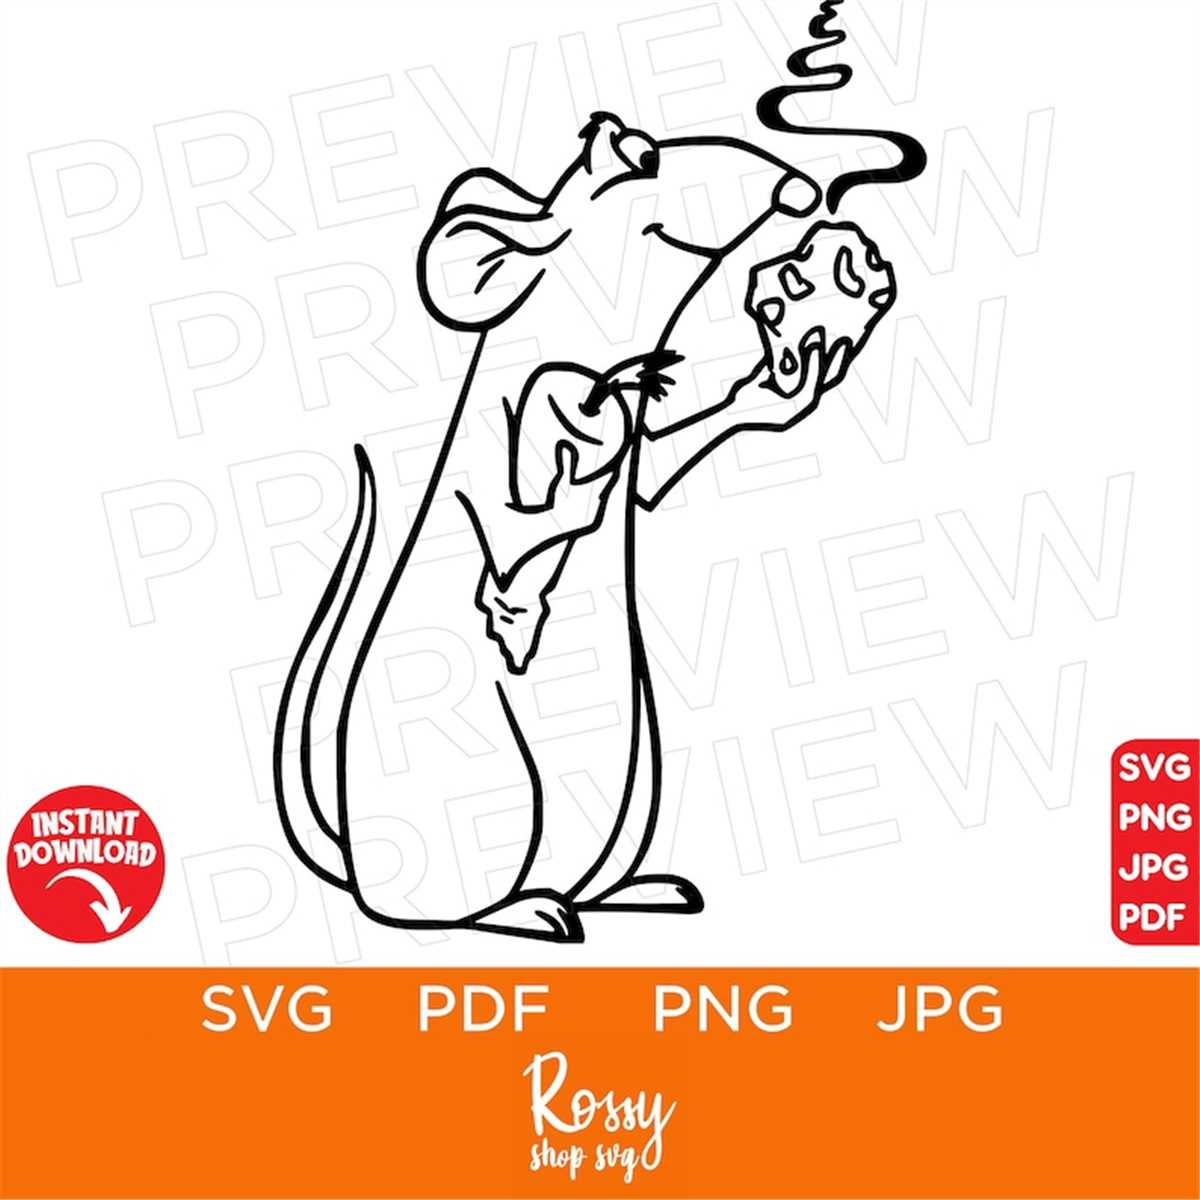 Remy ratatouille svg disneyland ears clipart anyone can